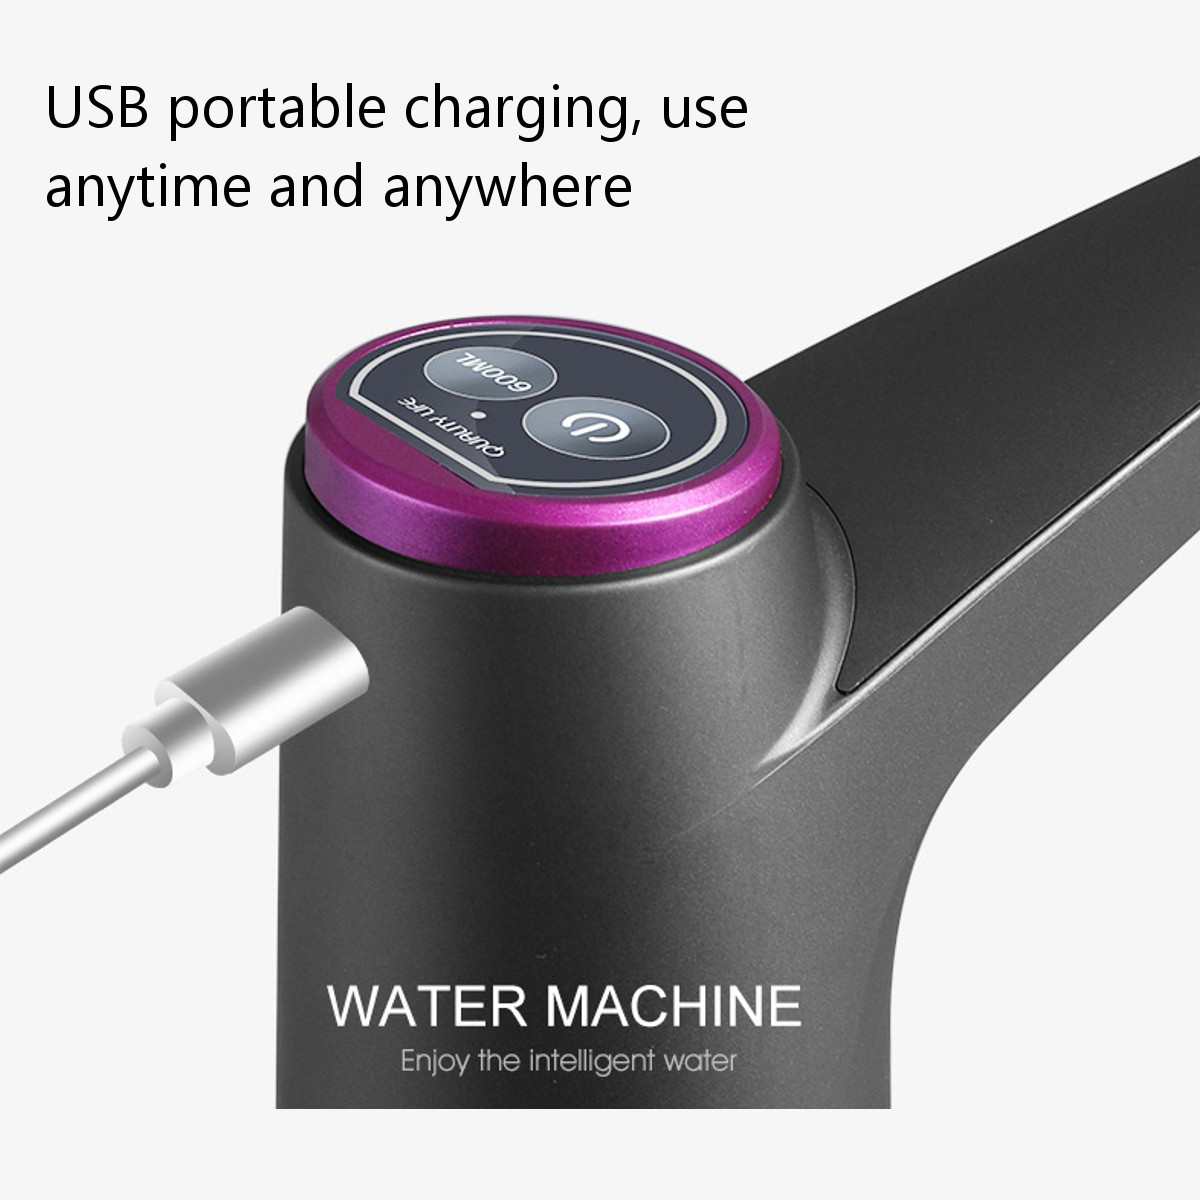 Portable-USB-Wireless-Electric-Water-Pump-Drinking-Bottle-Dispenser-Touch-Control-1670497-7